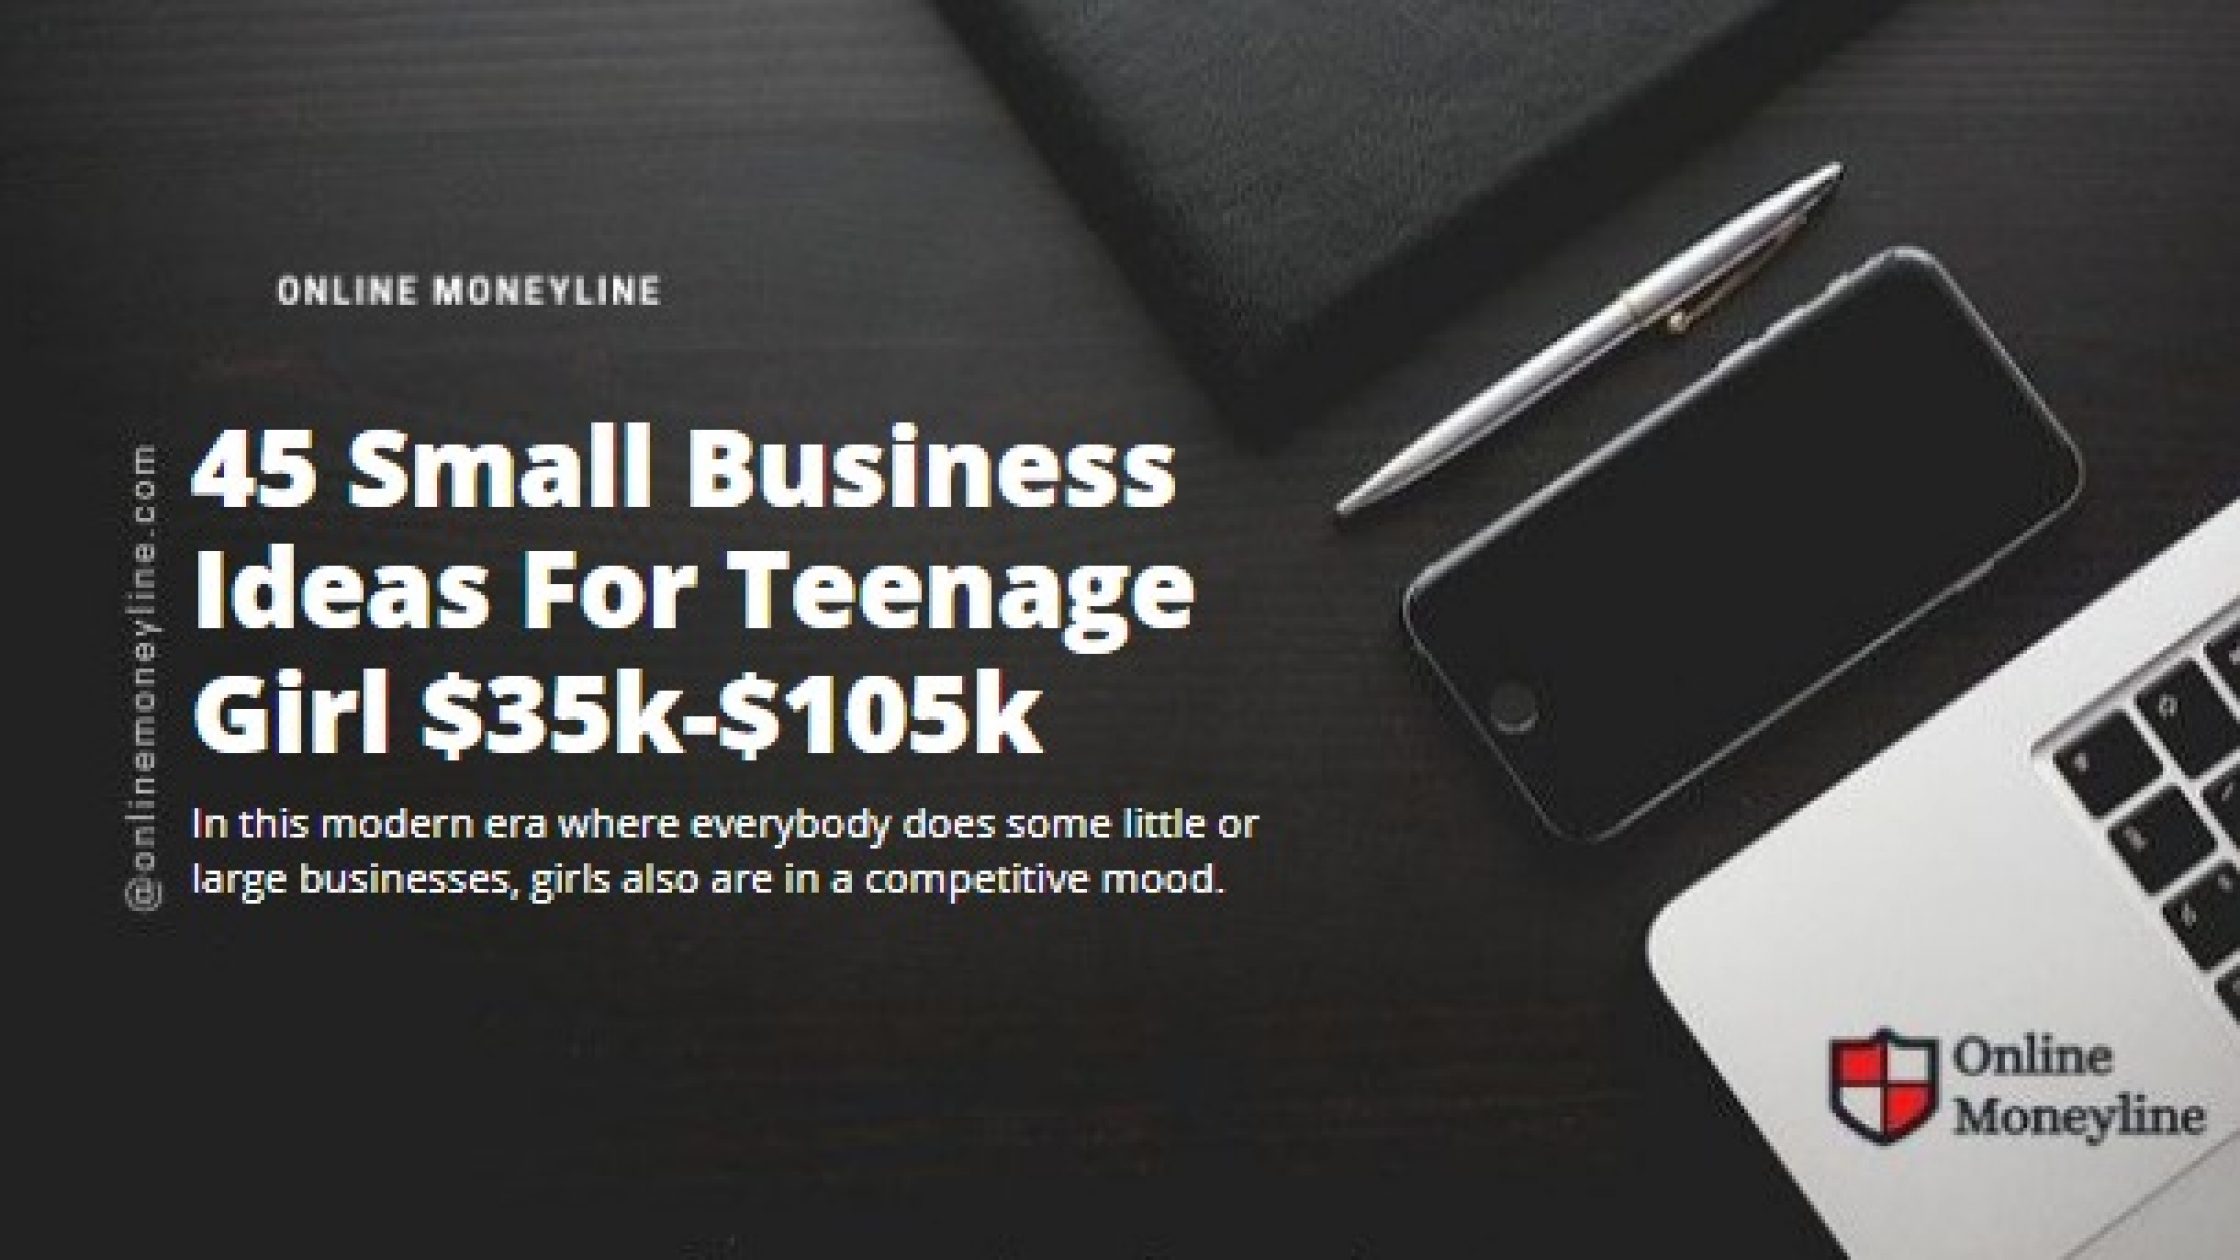 45 Small Business Ideas For Teenage Girl $35k-$105k